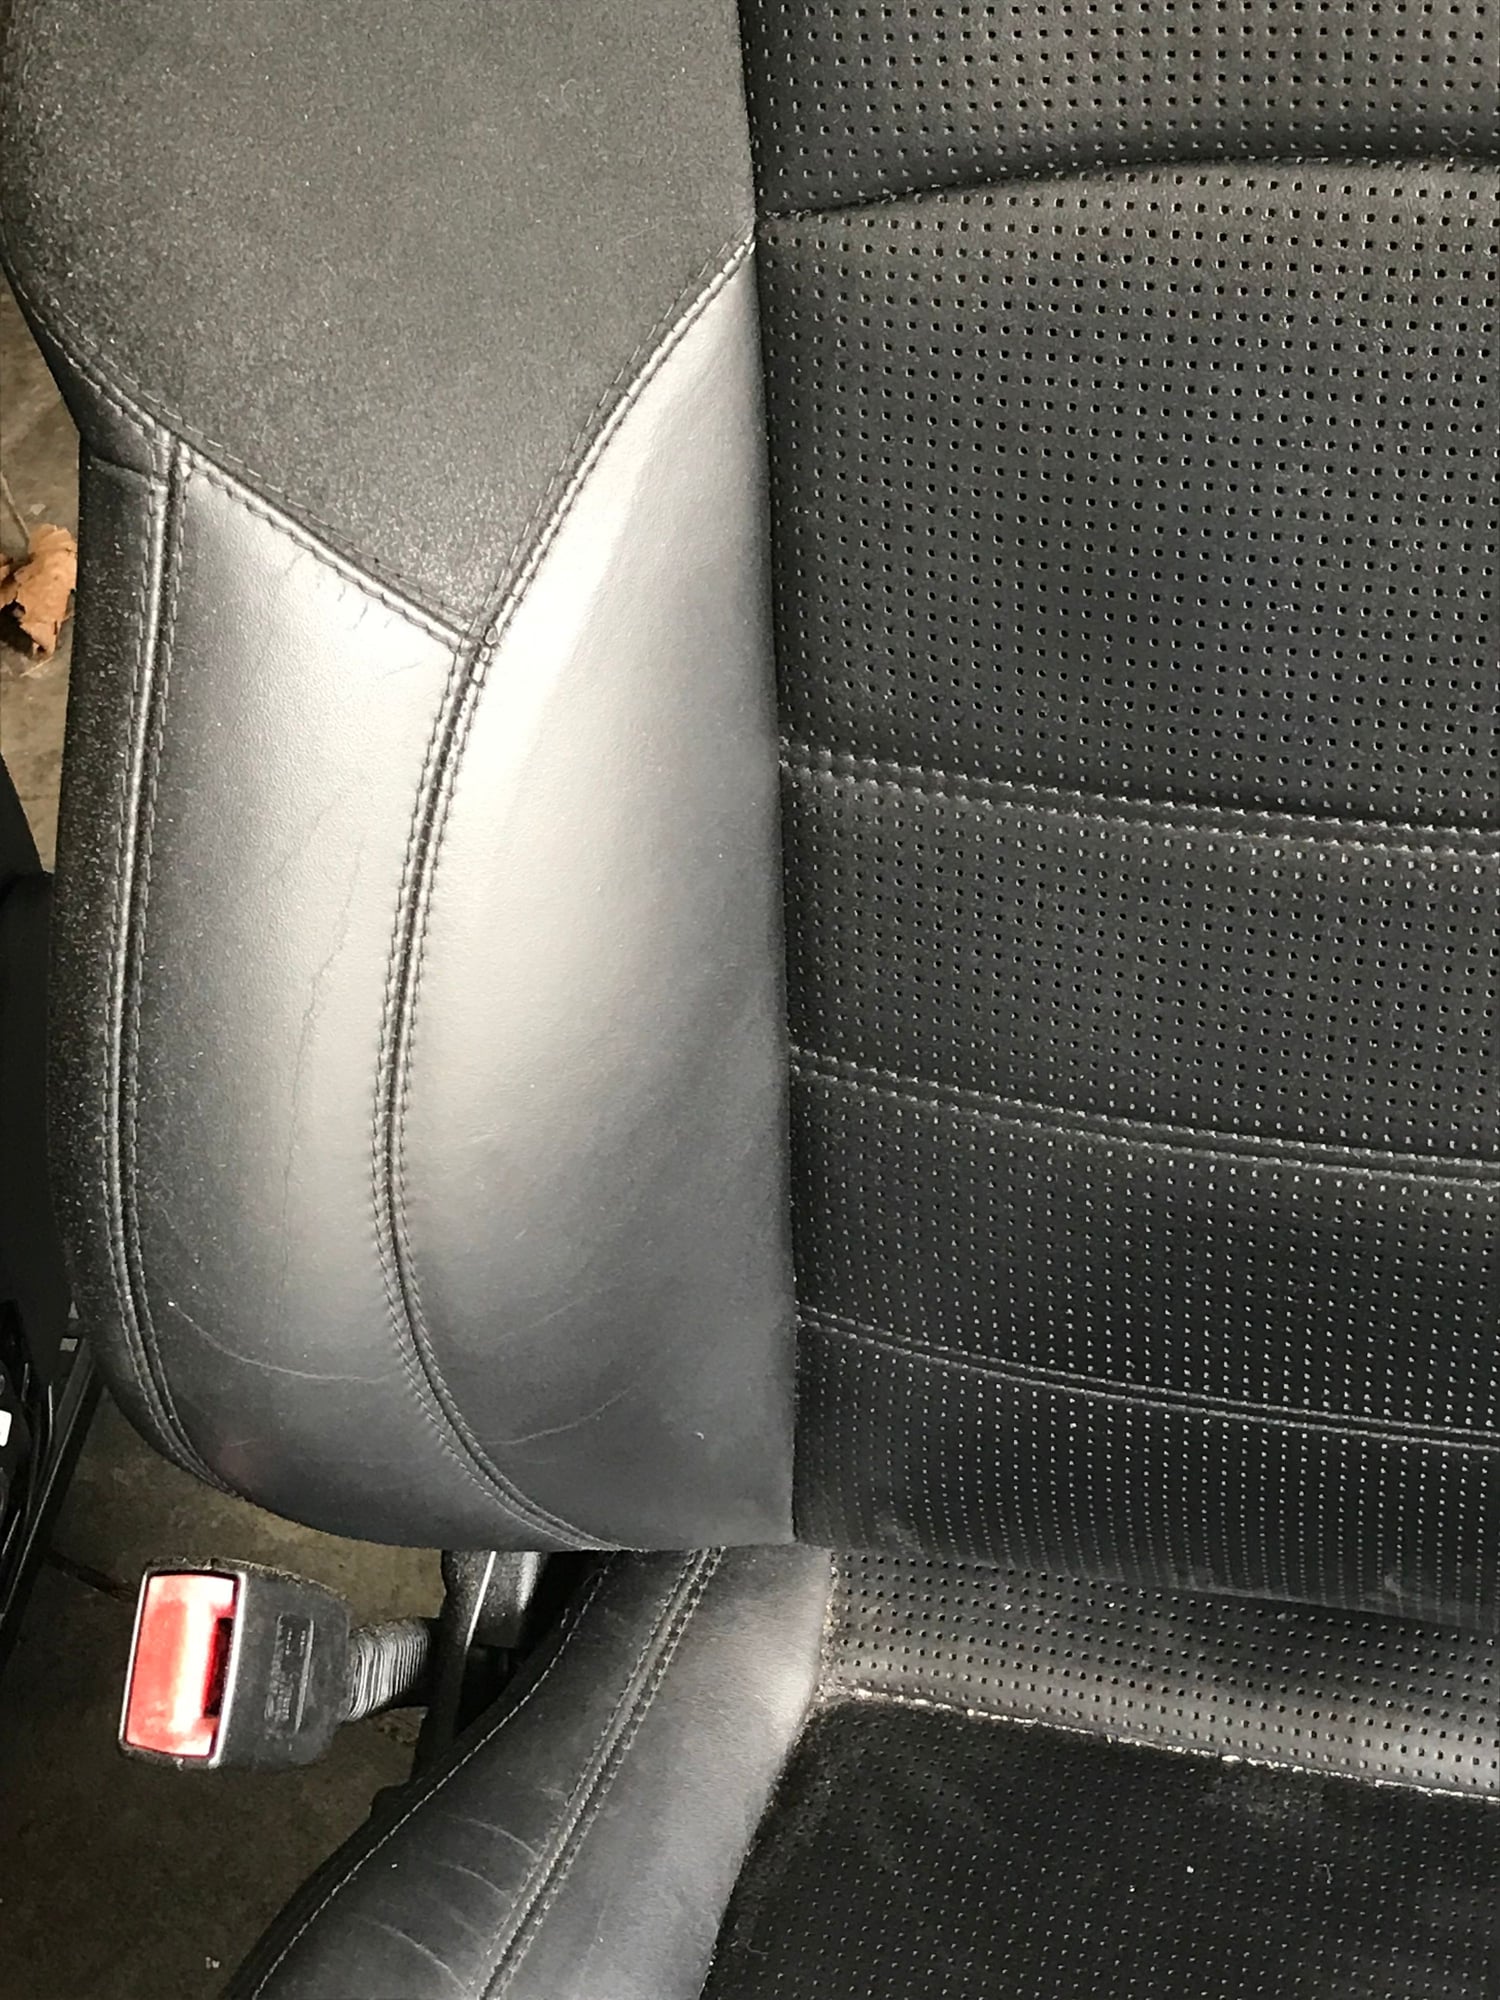 Interior/Upholstery - AMG Seats Pair W211 E63 M156 Black - Used - 2007 to 2010 Mercedes-Benz E63 AMG - Cincinnati, OH 45211, United States